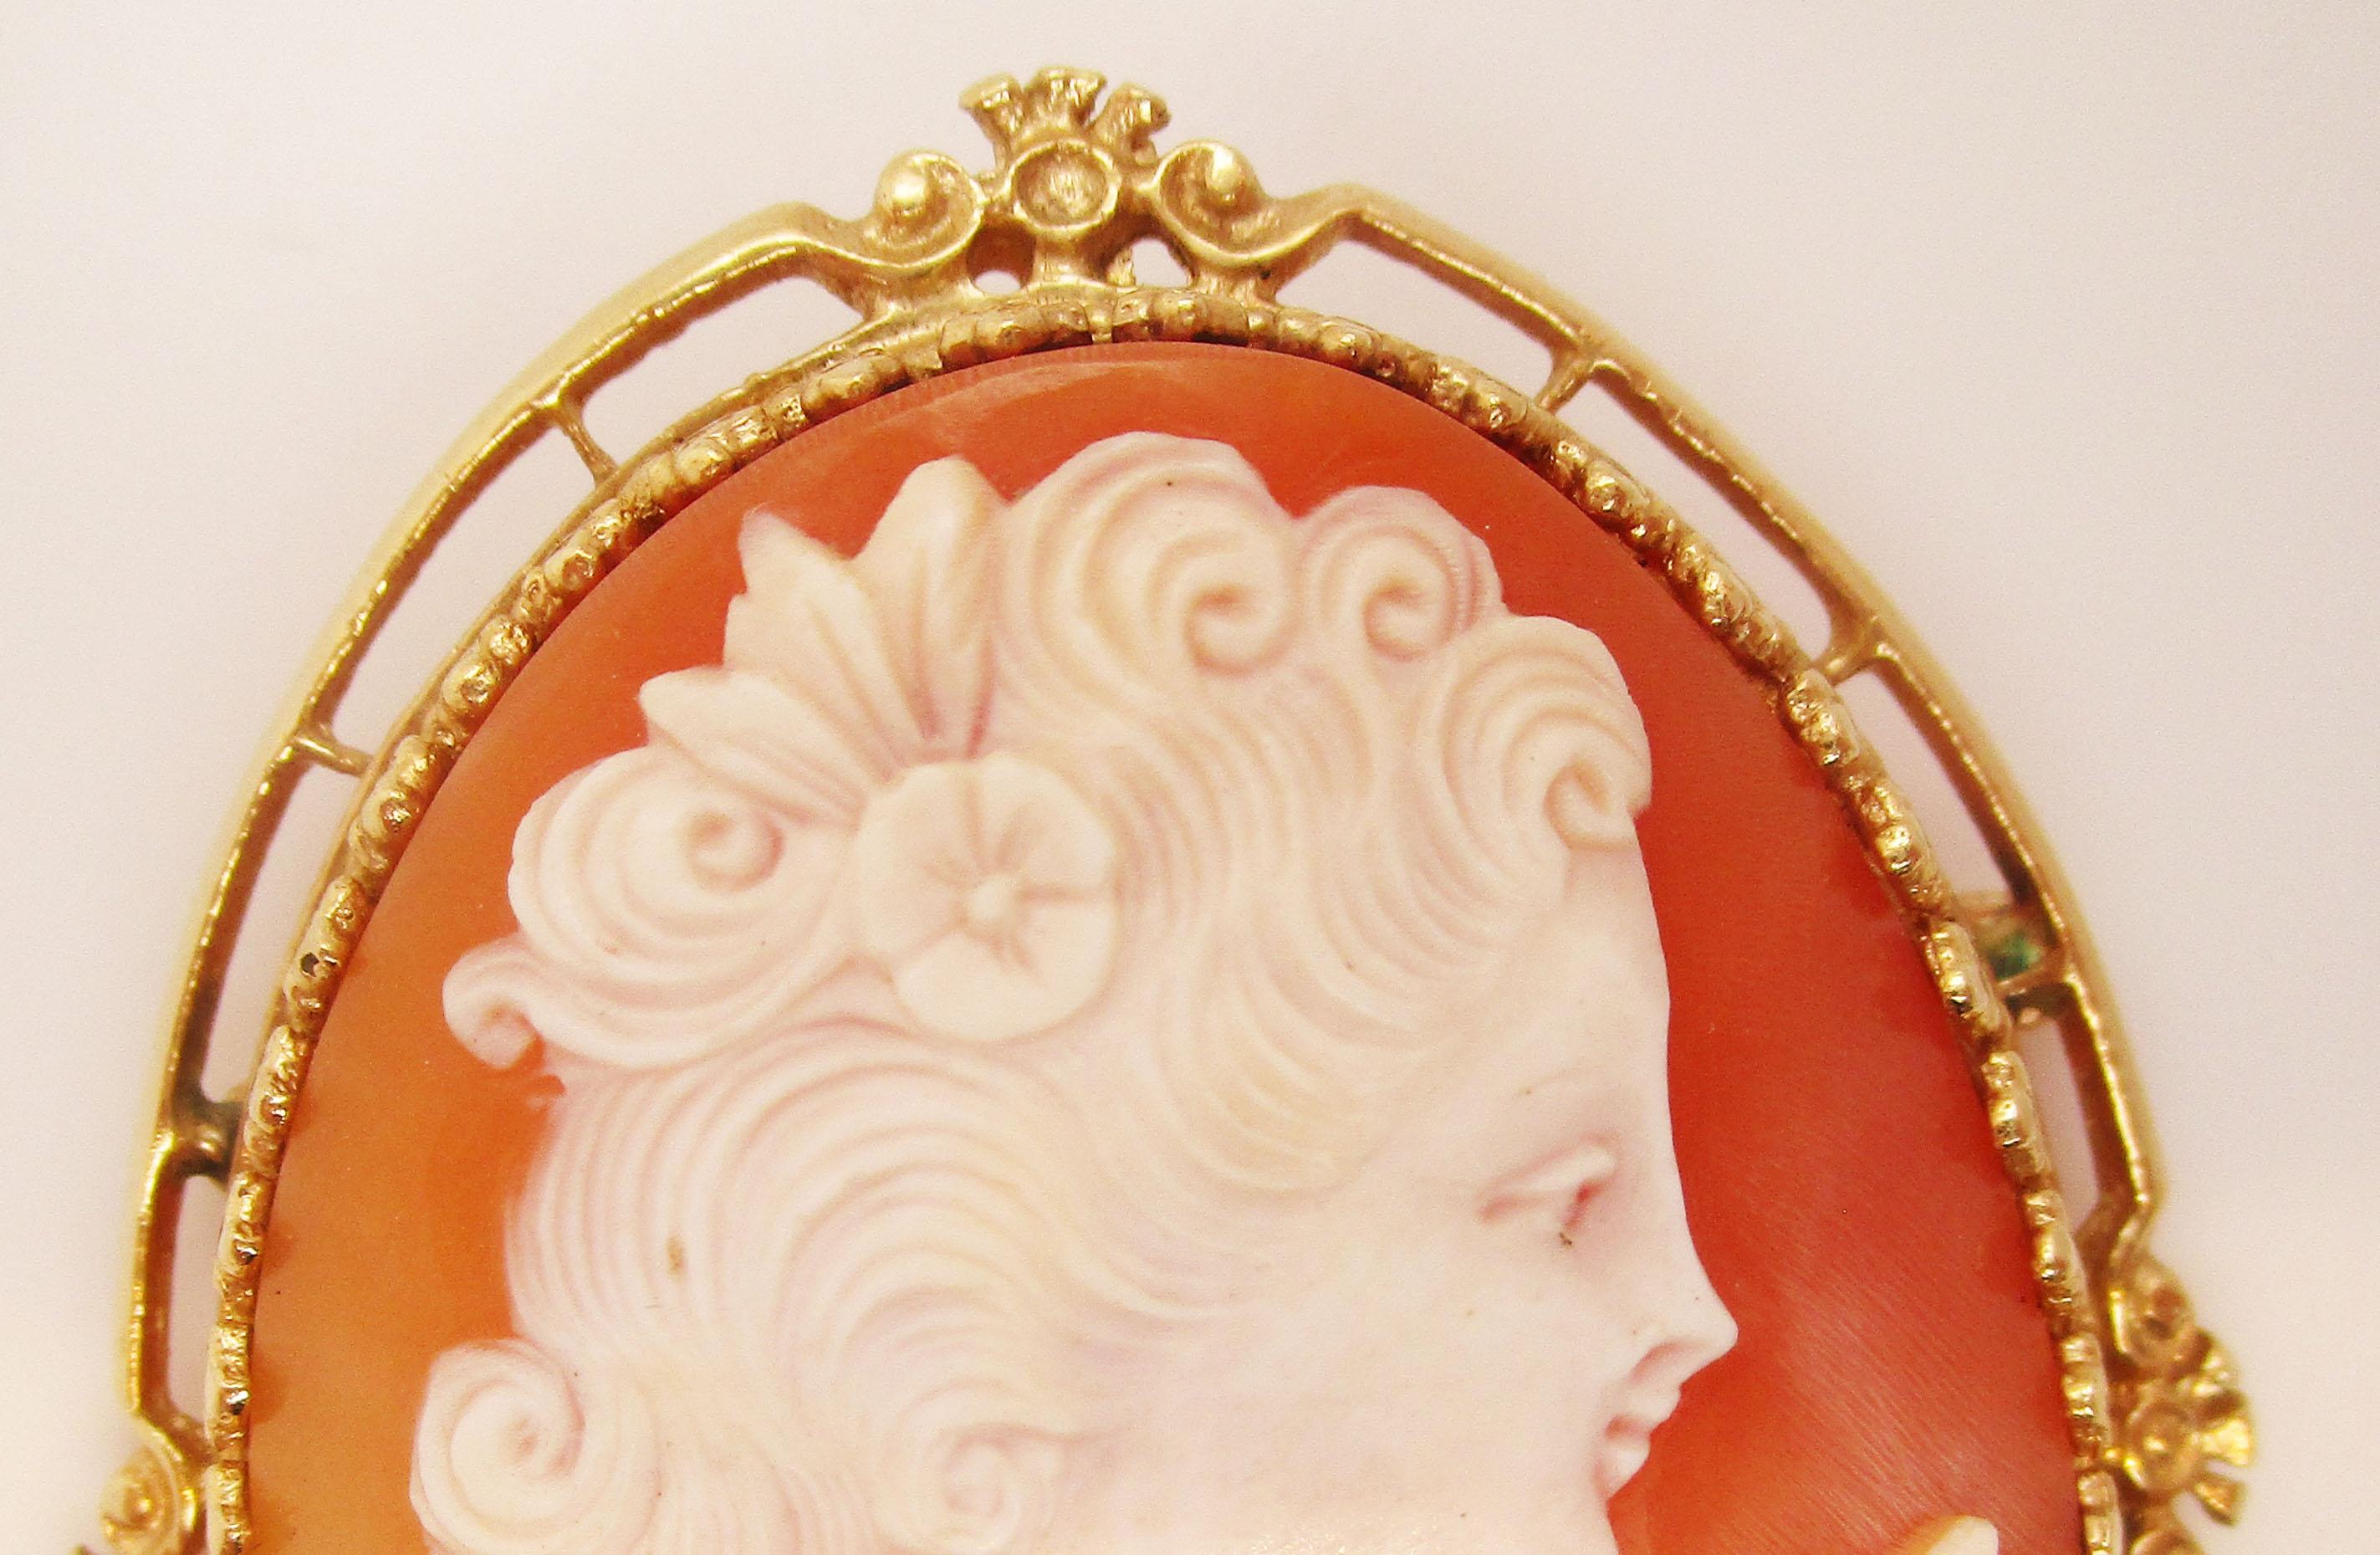 Modern Midcentury Hand Carved Shell Cameo in 14 Karat Yellow Gold Pin Pendant